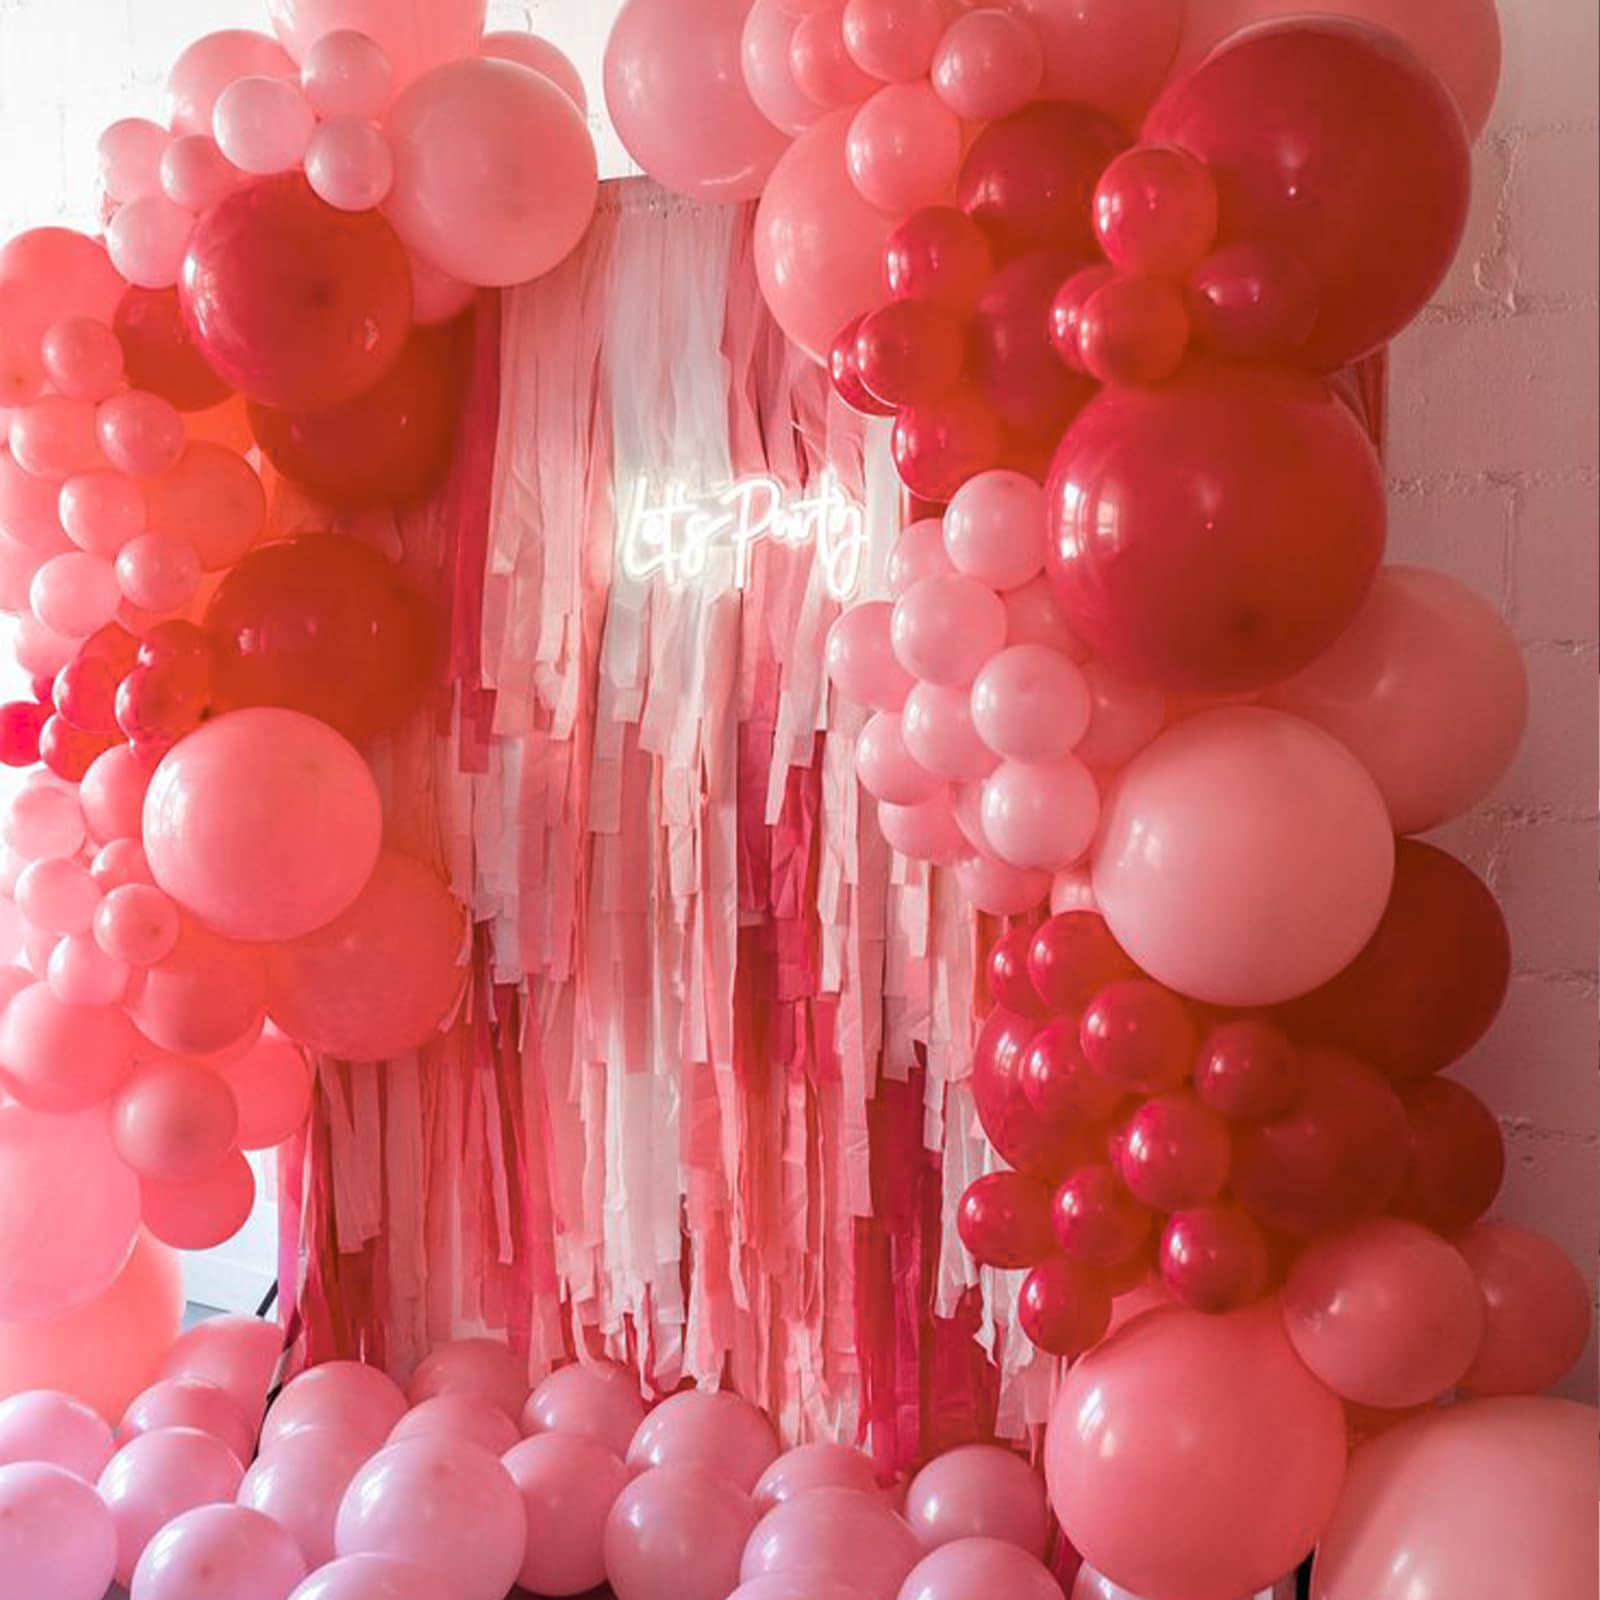 PartyWoo Watermelon Pink Balloons, 100 pcs Pink Balloons Different Sizes Pack of 36 Inch 18 Inch 12 Inch 10 Inch 5 Inch Pink Balloons for Balloon Garland or Balloon Arch as Party Decorations, Pink-Q11